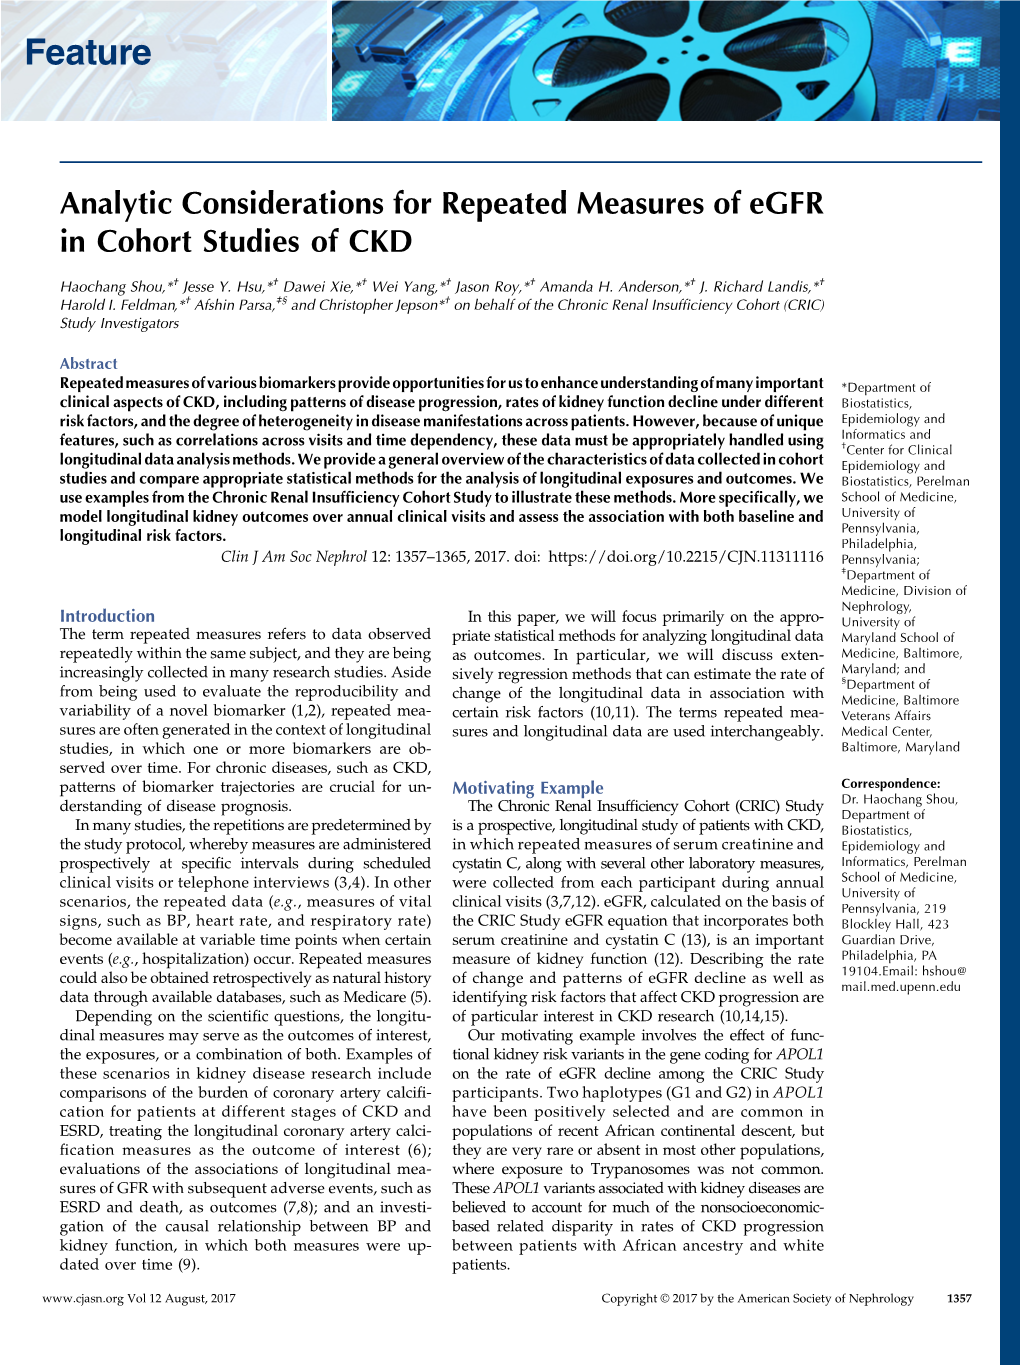 Analytic Considerations for Repeated Measures of Egfr in Cohort Studies of CKD